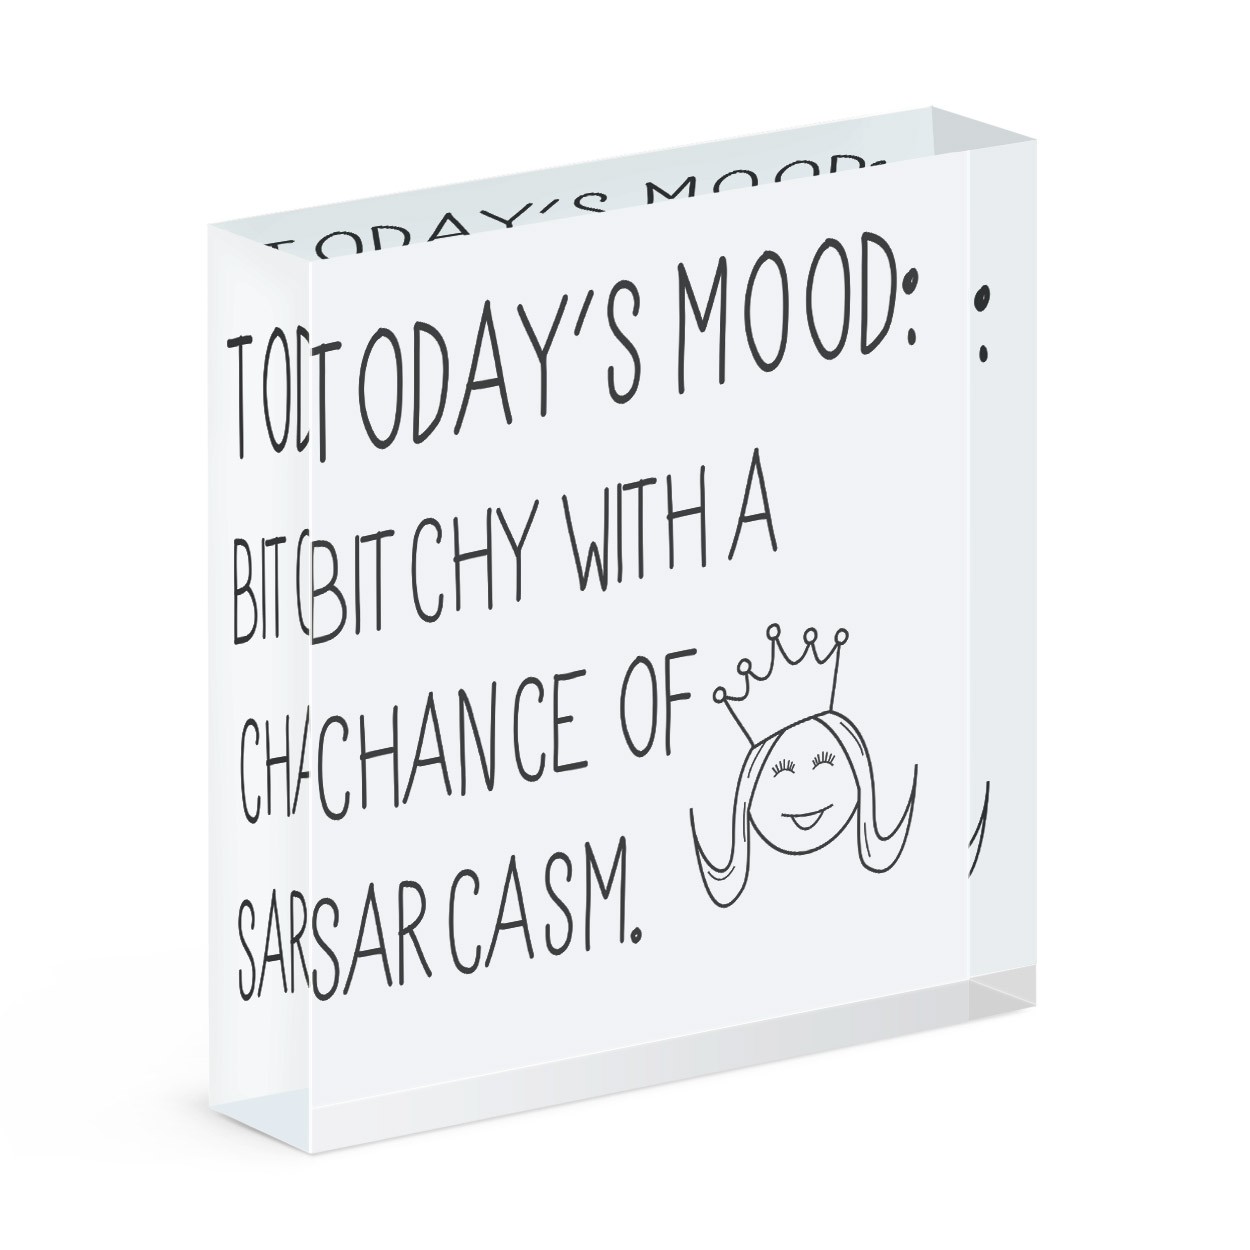 Today's Mood Bitchy With A Chance Of Sarcasm Acrylic Block